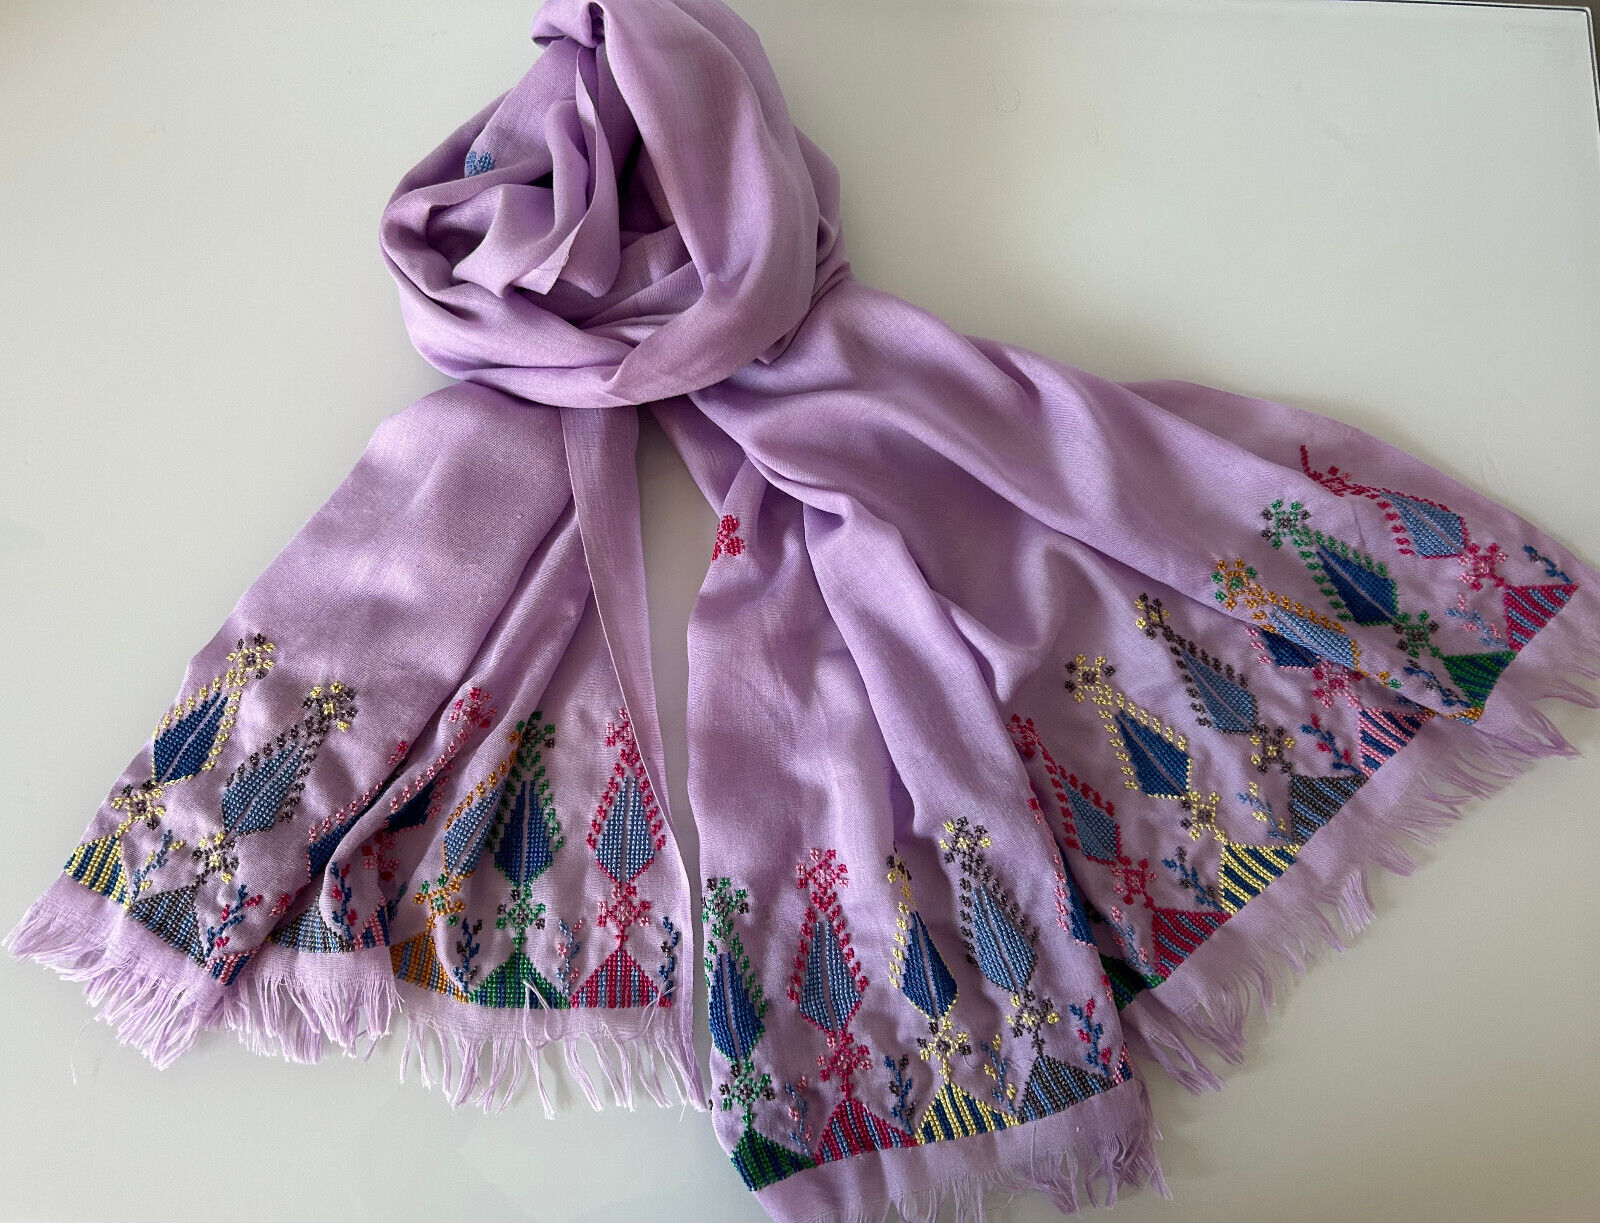 Palestinian embroidered scarf/shawl (New without tags) -Handmade